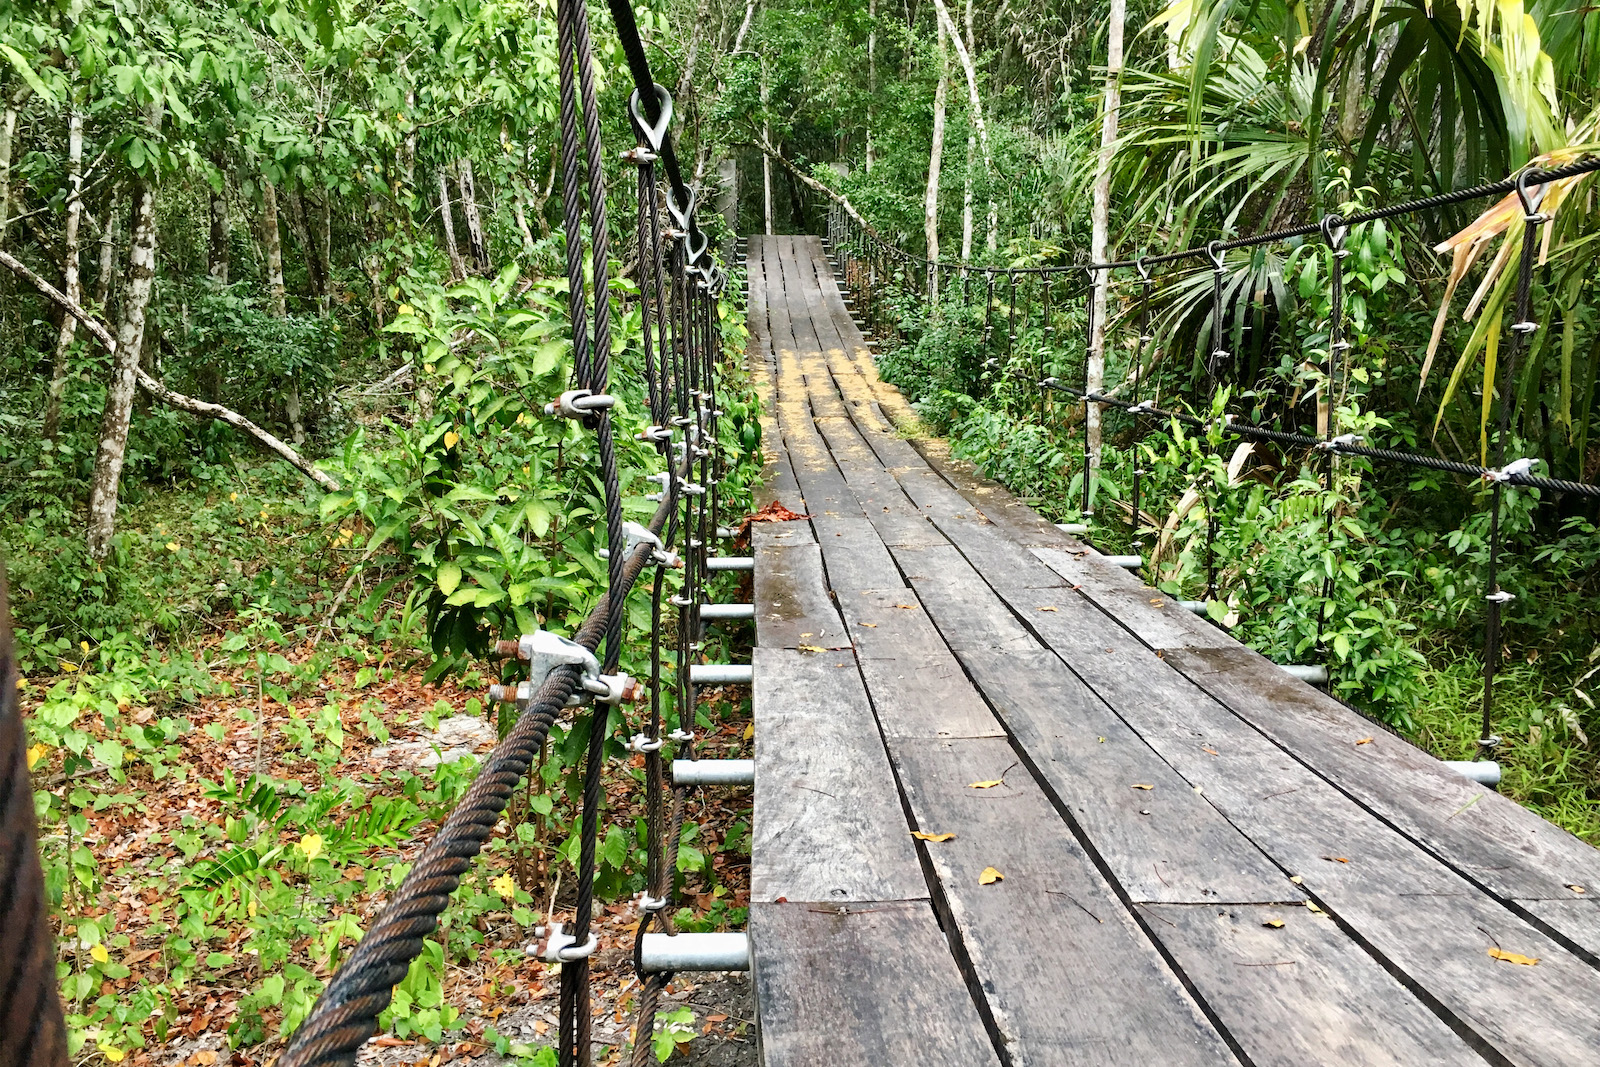 A wooden bridge in a green forest